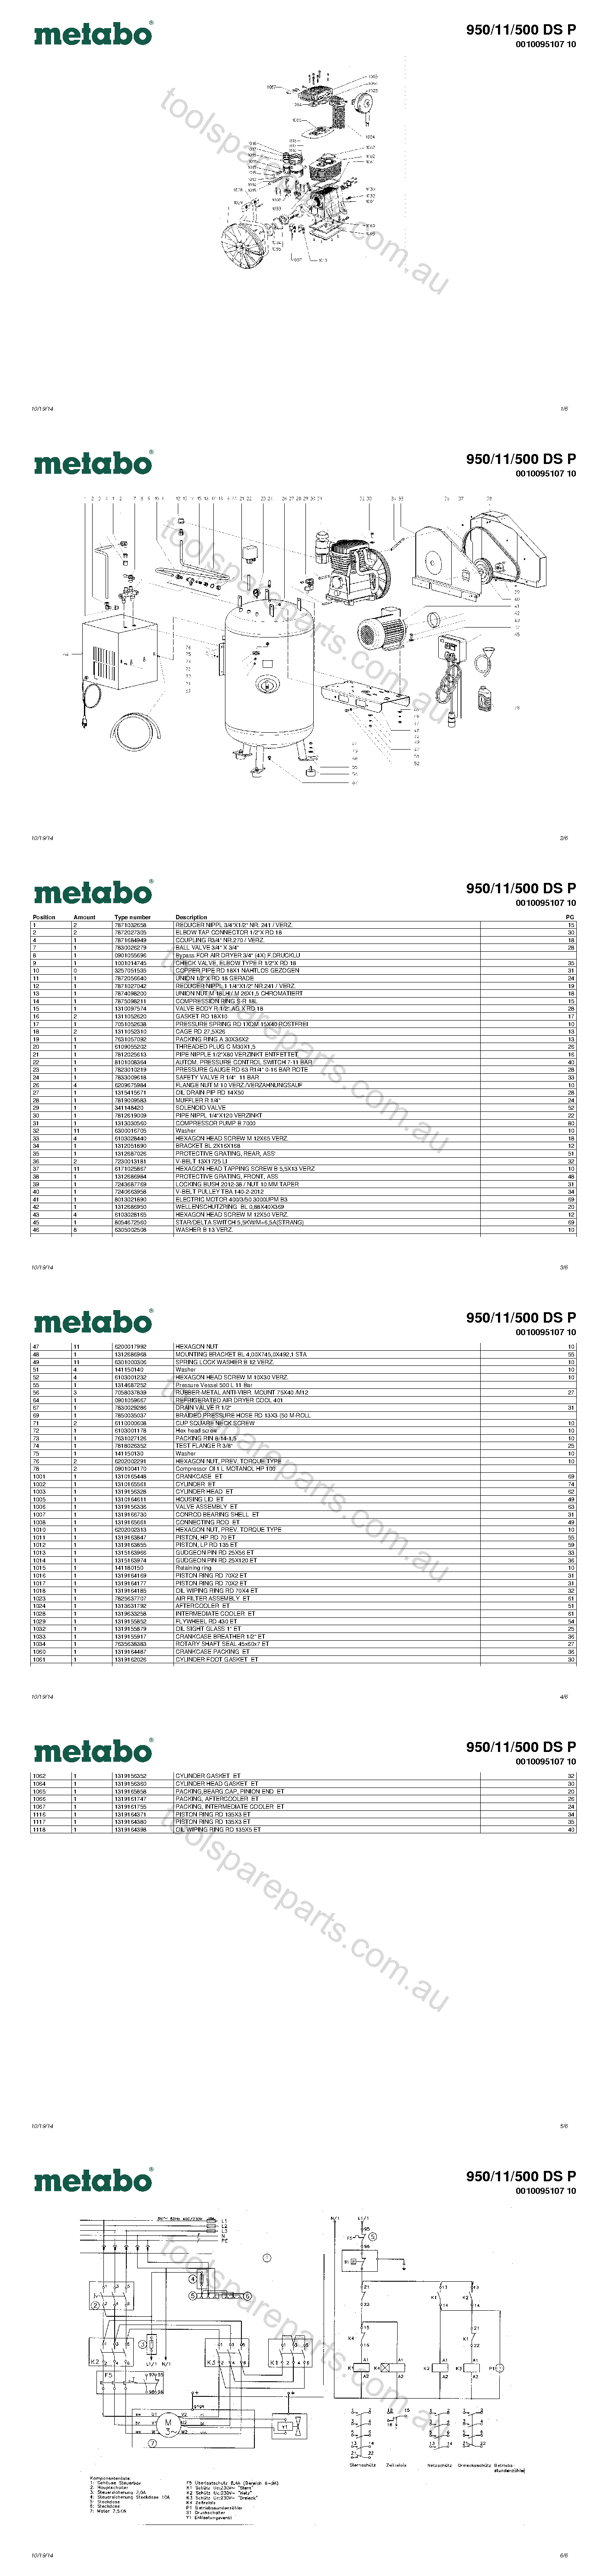 Metabo 950/11/500 DS P 0010095107 10  Diagram 1